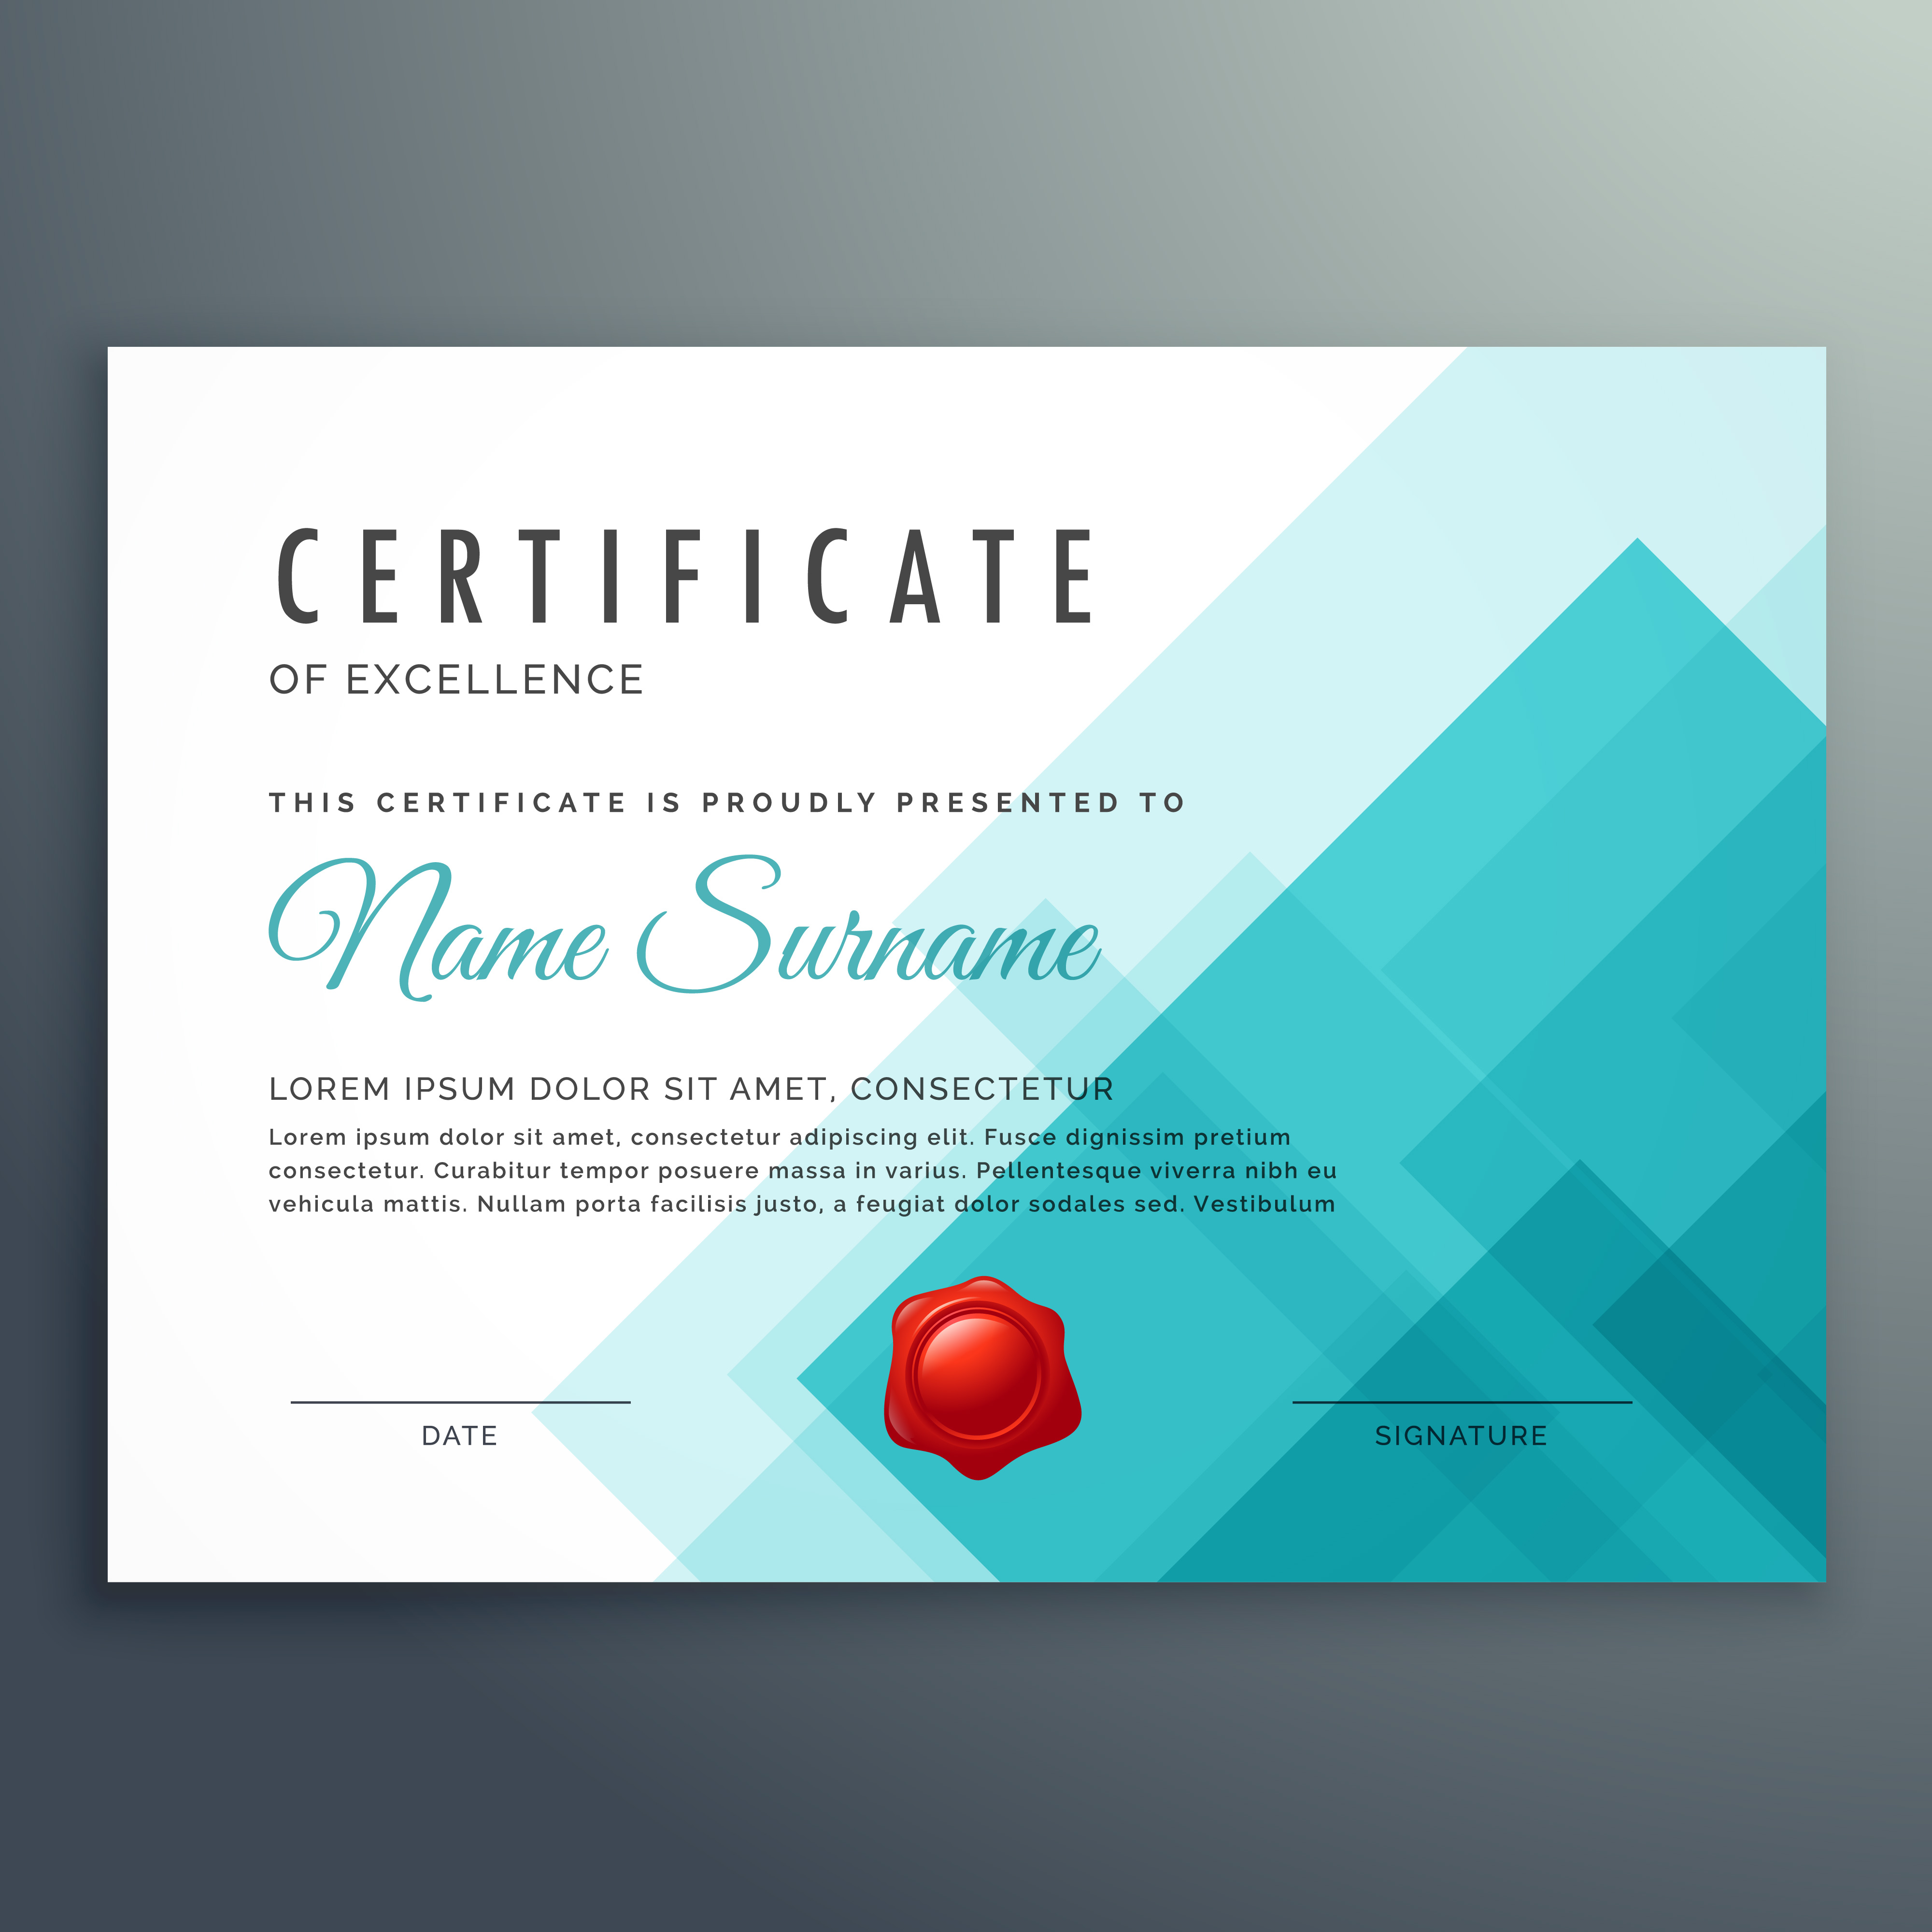 certificate-of-excellence-template-free-download-best-template-inspiration